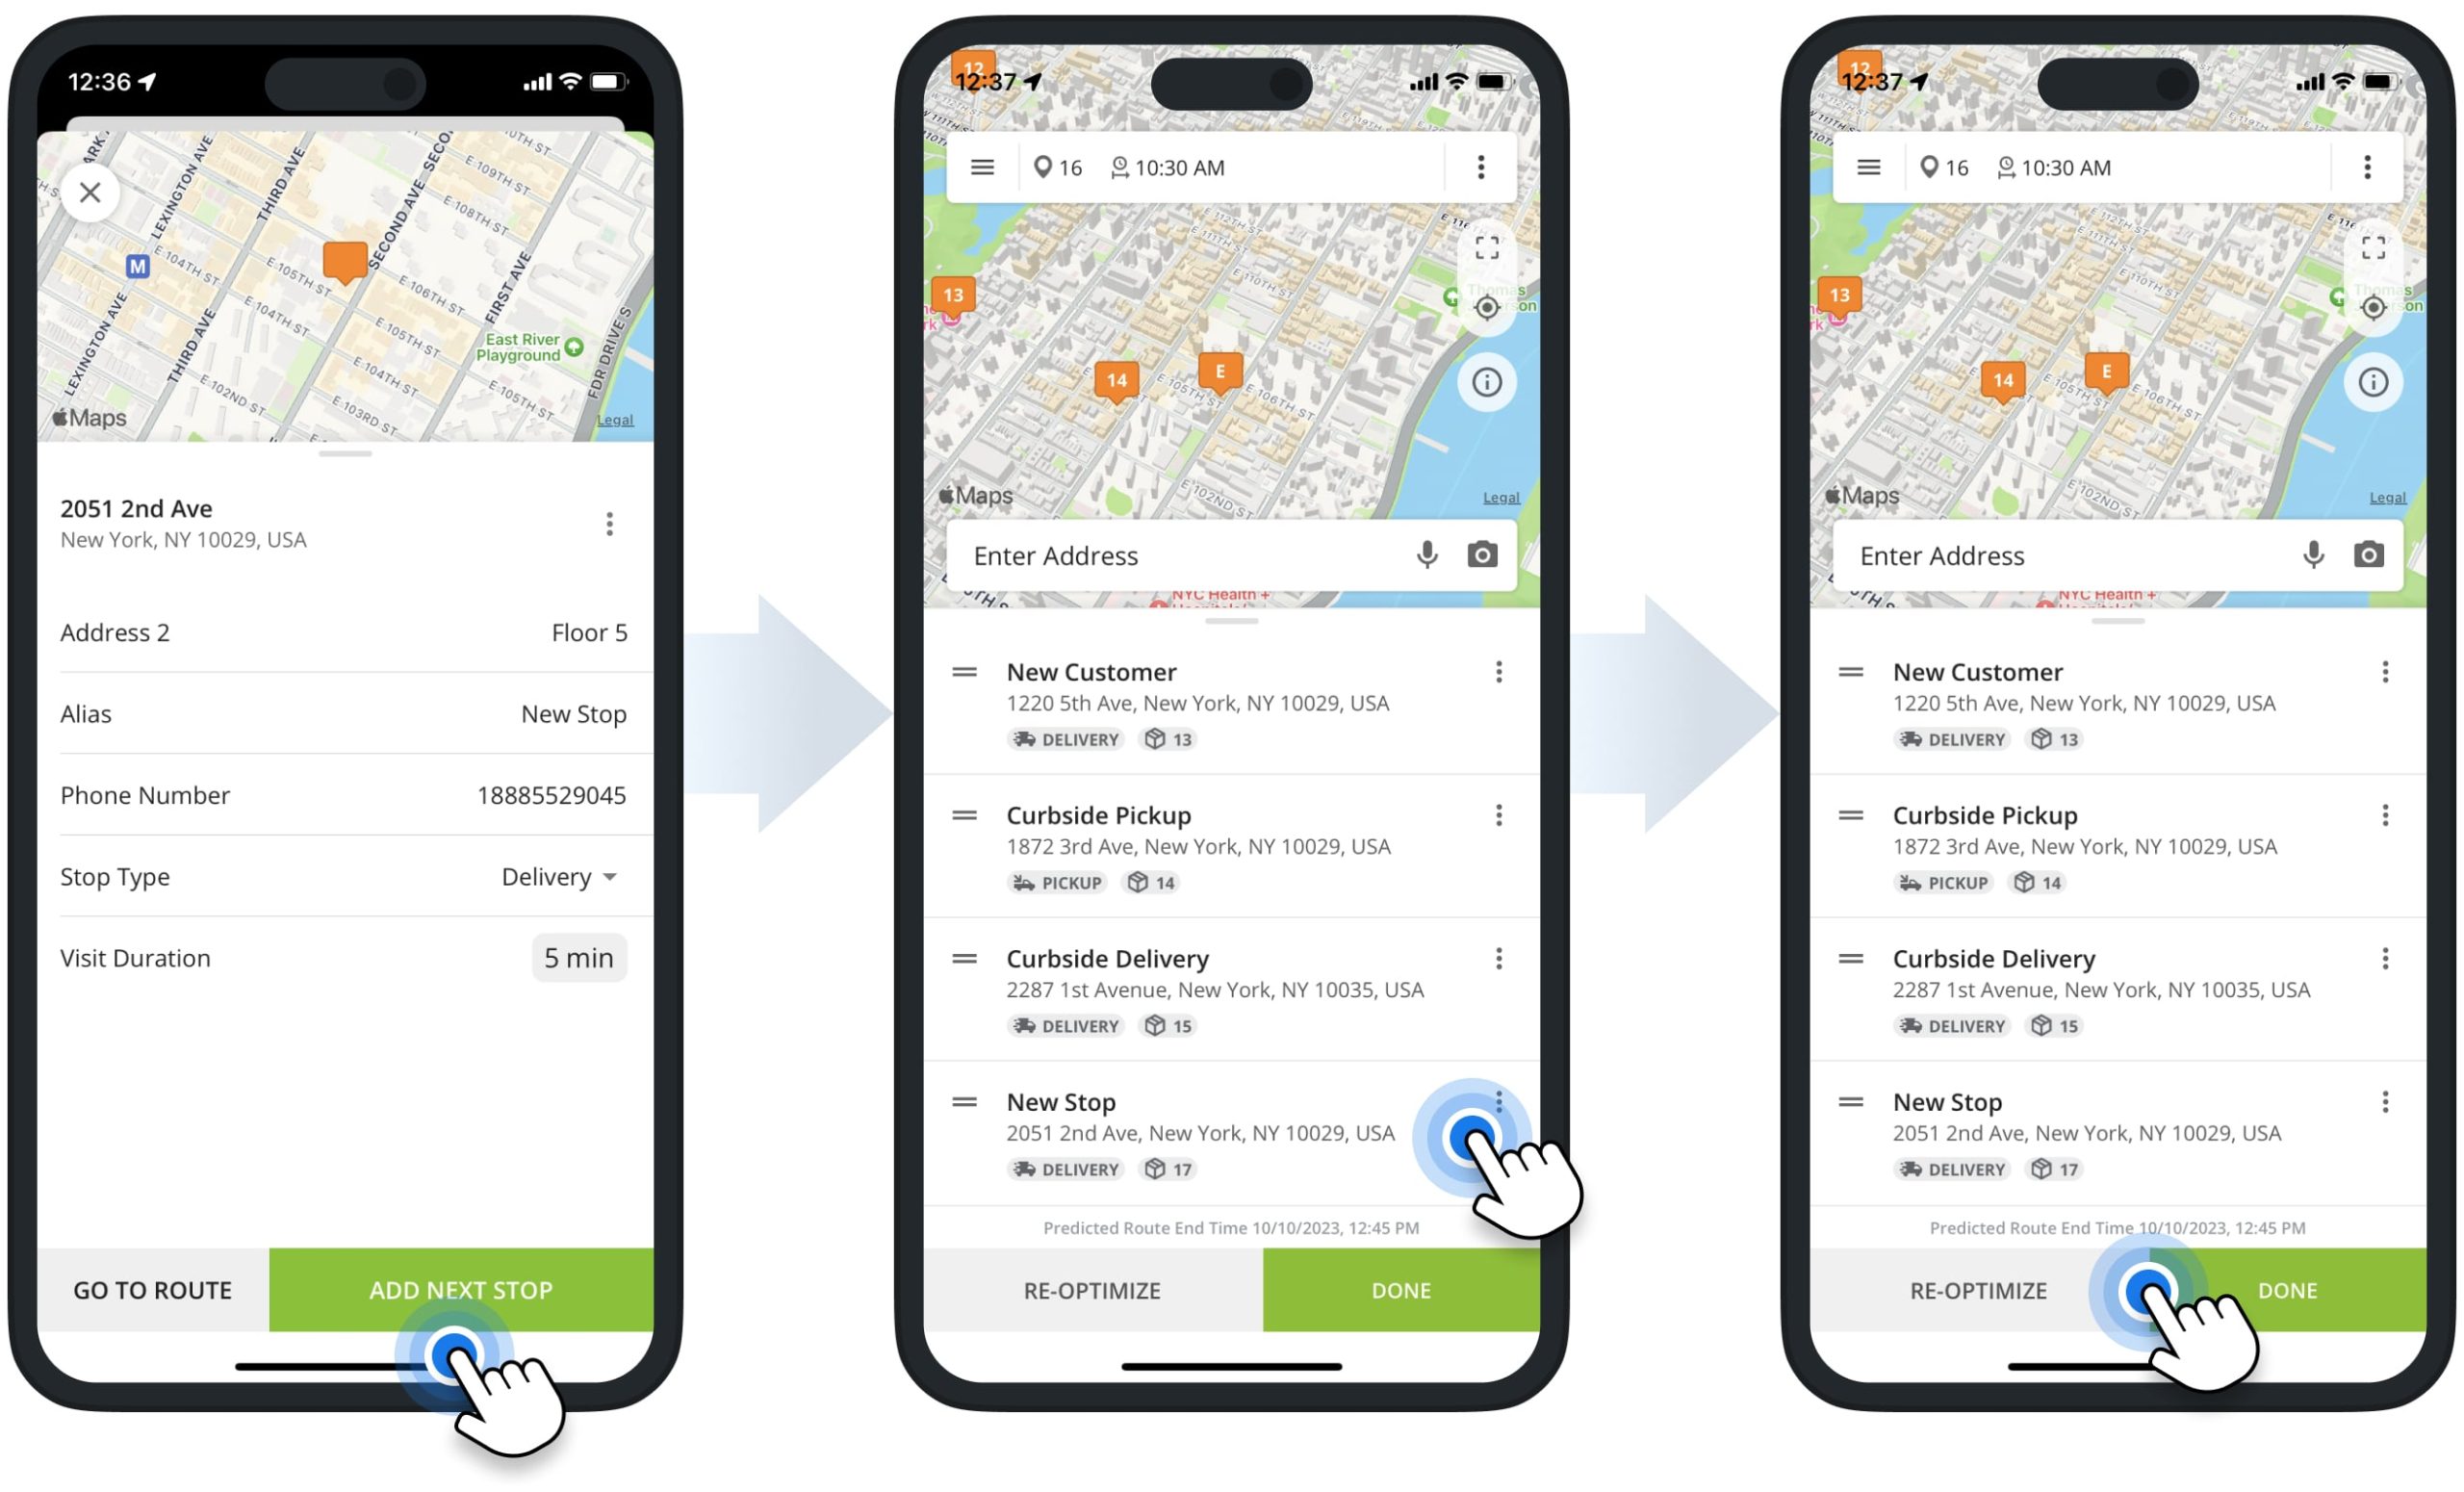 Adding stops to planned routes with address autocomplete and geocoding using Route4Me's iPhone Route Planning app.